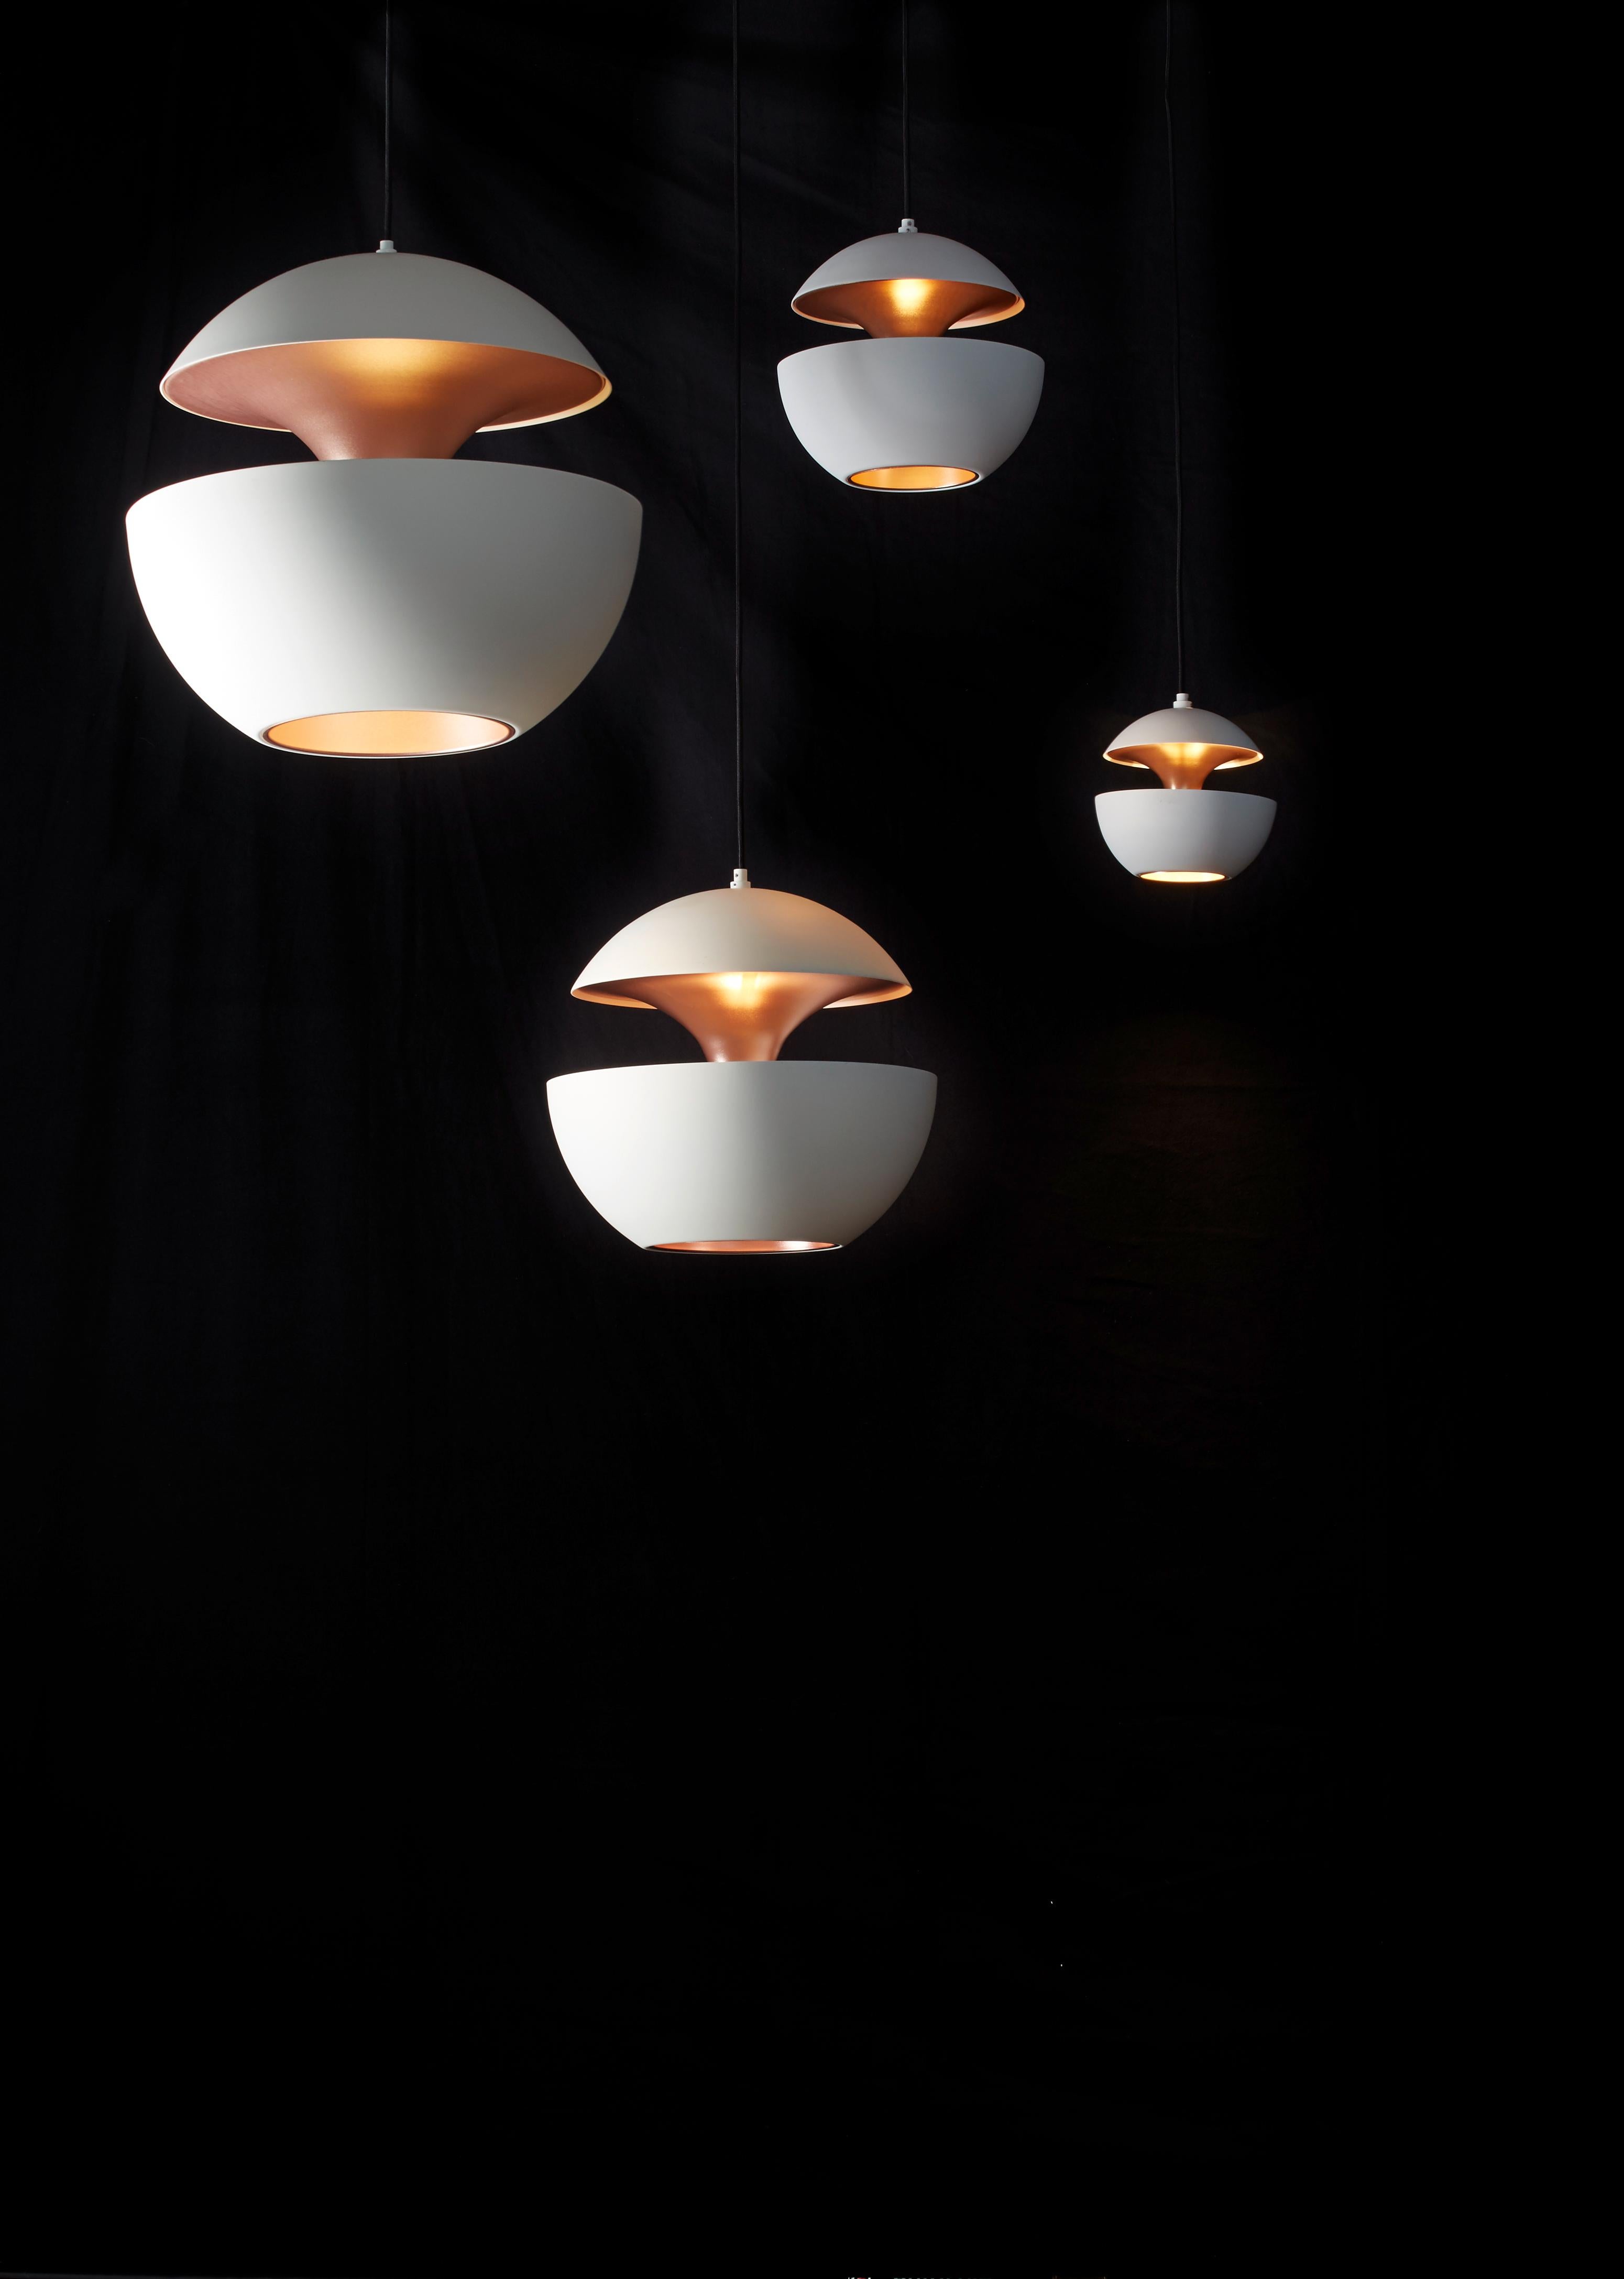 Here comes the sun mini white pendant lamp by Bertrand Balas
Dimensions: D 10 x H 10cm
Materials: Aluminum
Available in different sizes and colors

All our lamps can be wired according to each country. If sold to the USA it will be wired for